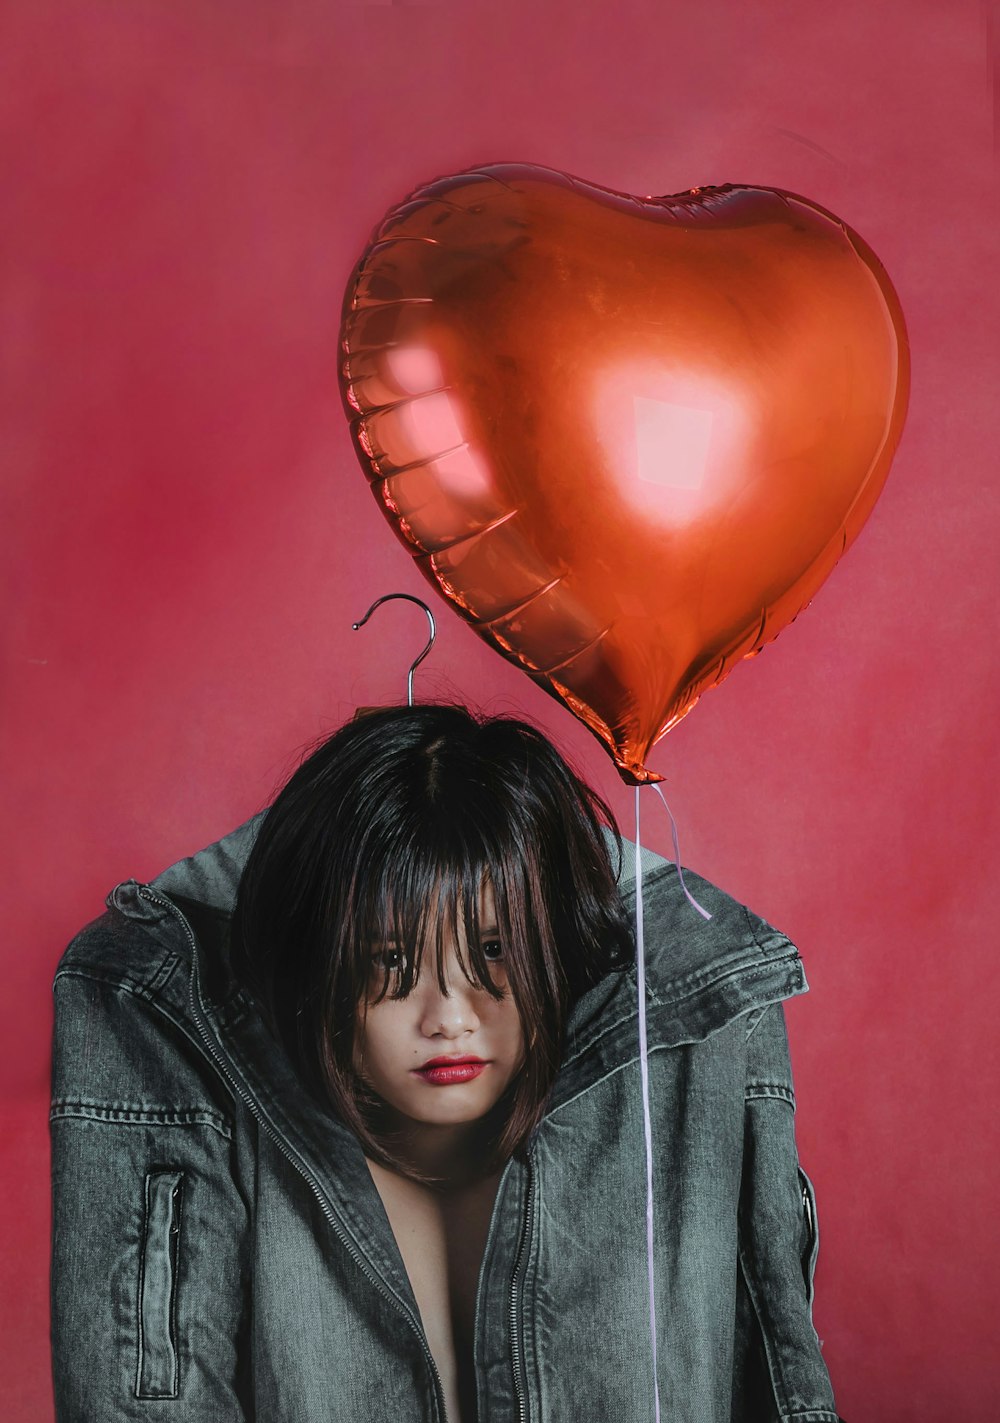 girl in gray jacket holding red balloon